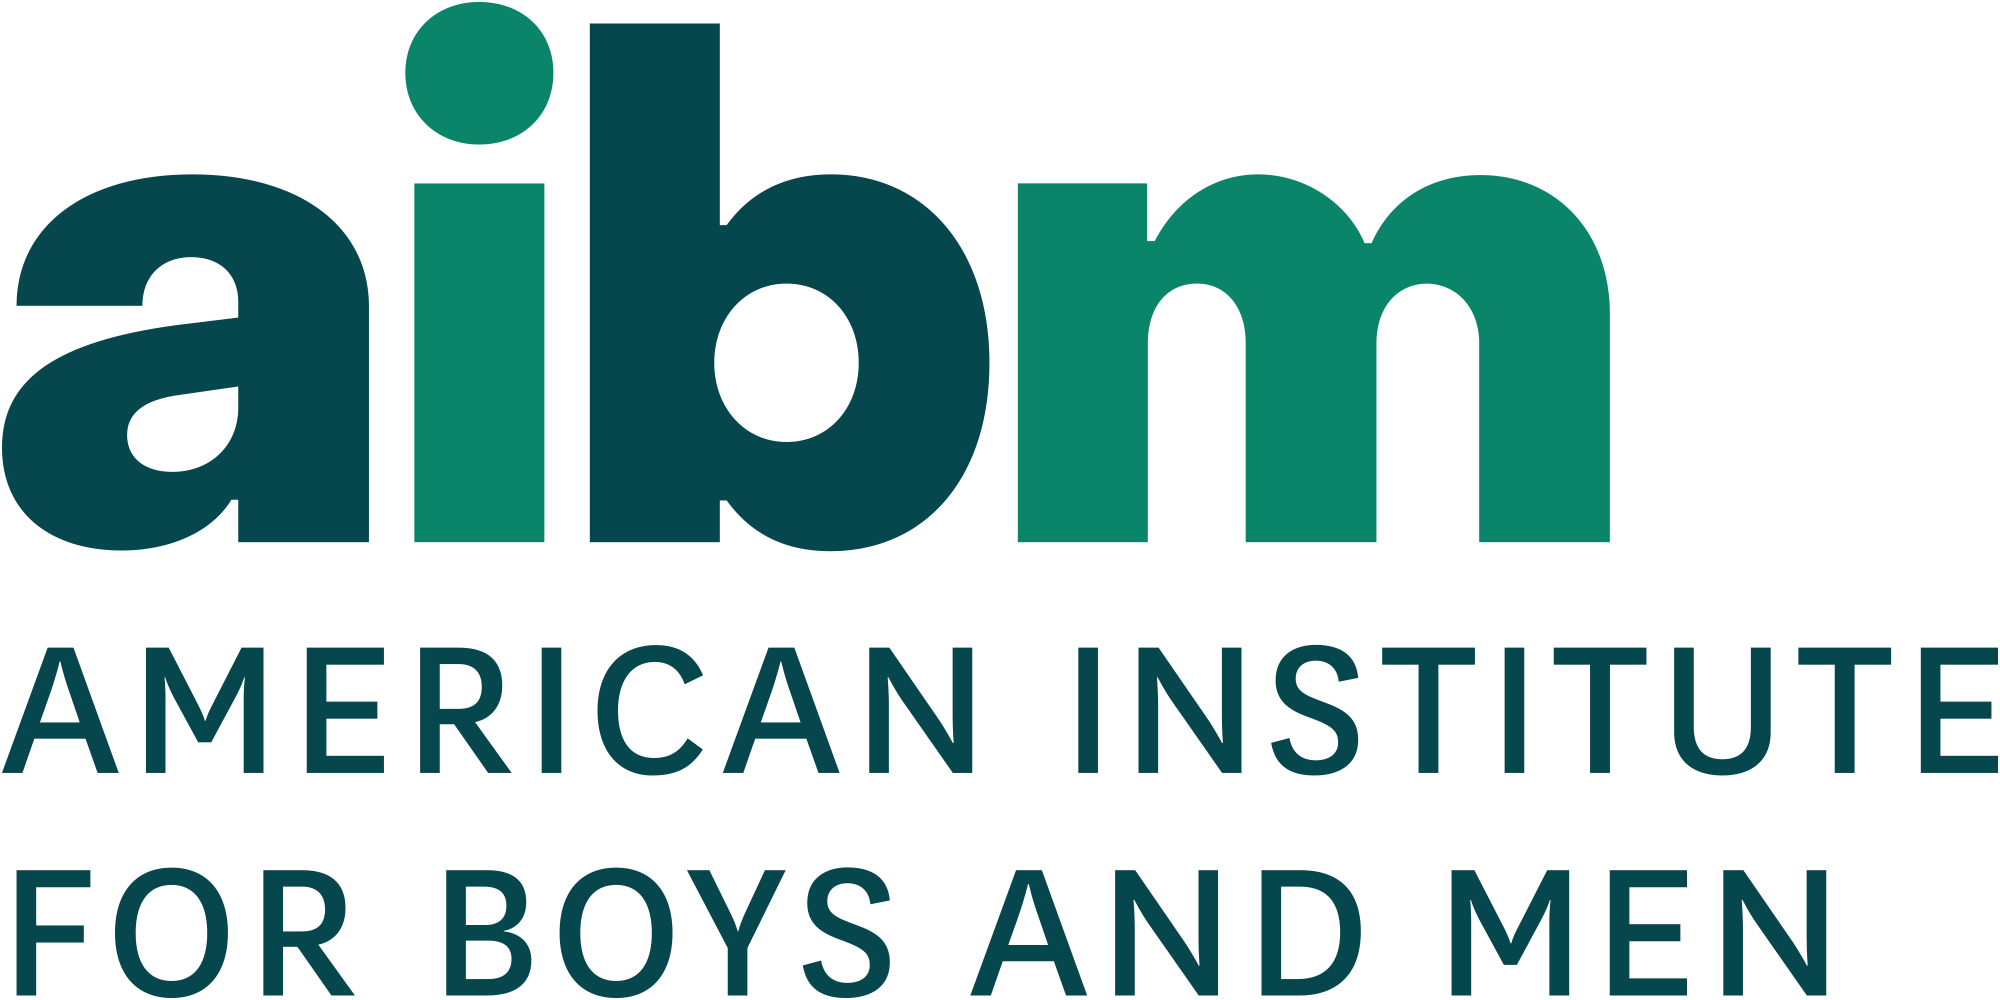 American Institute for Boys and Men logo